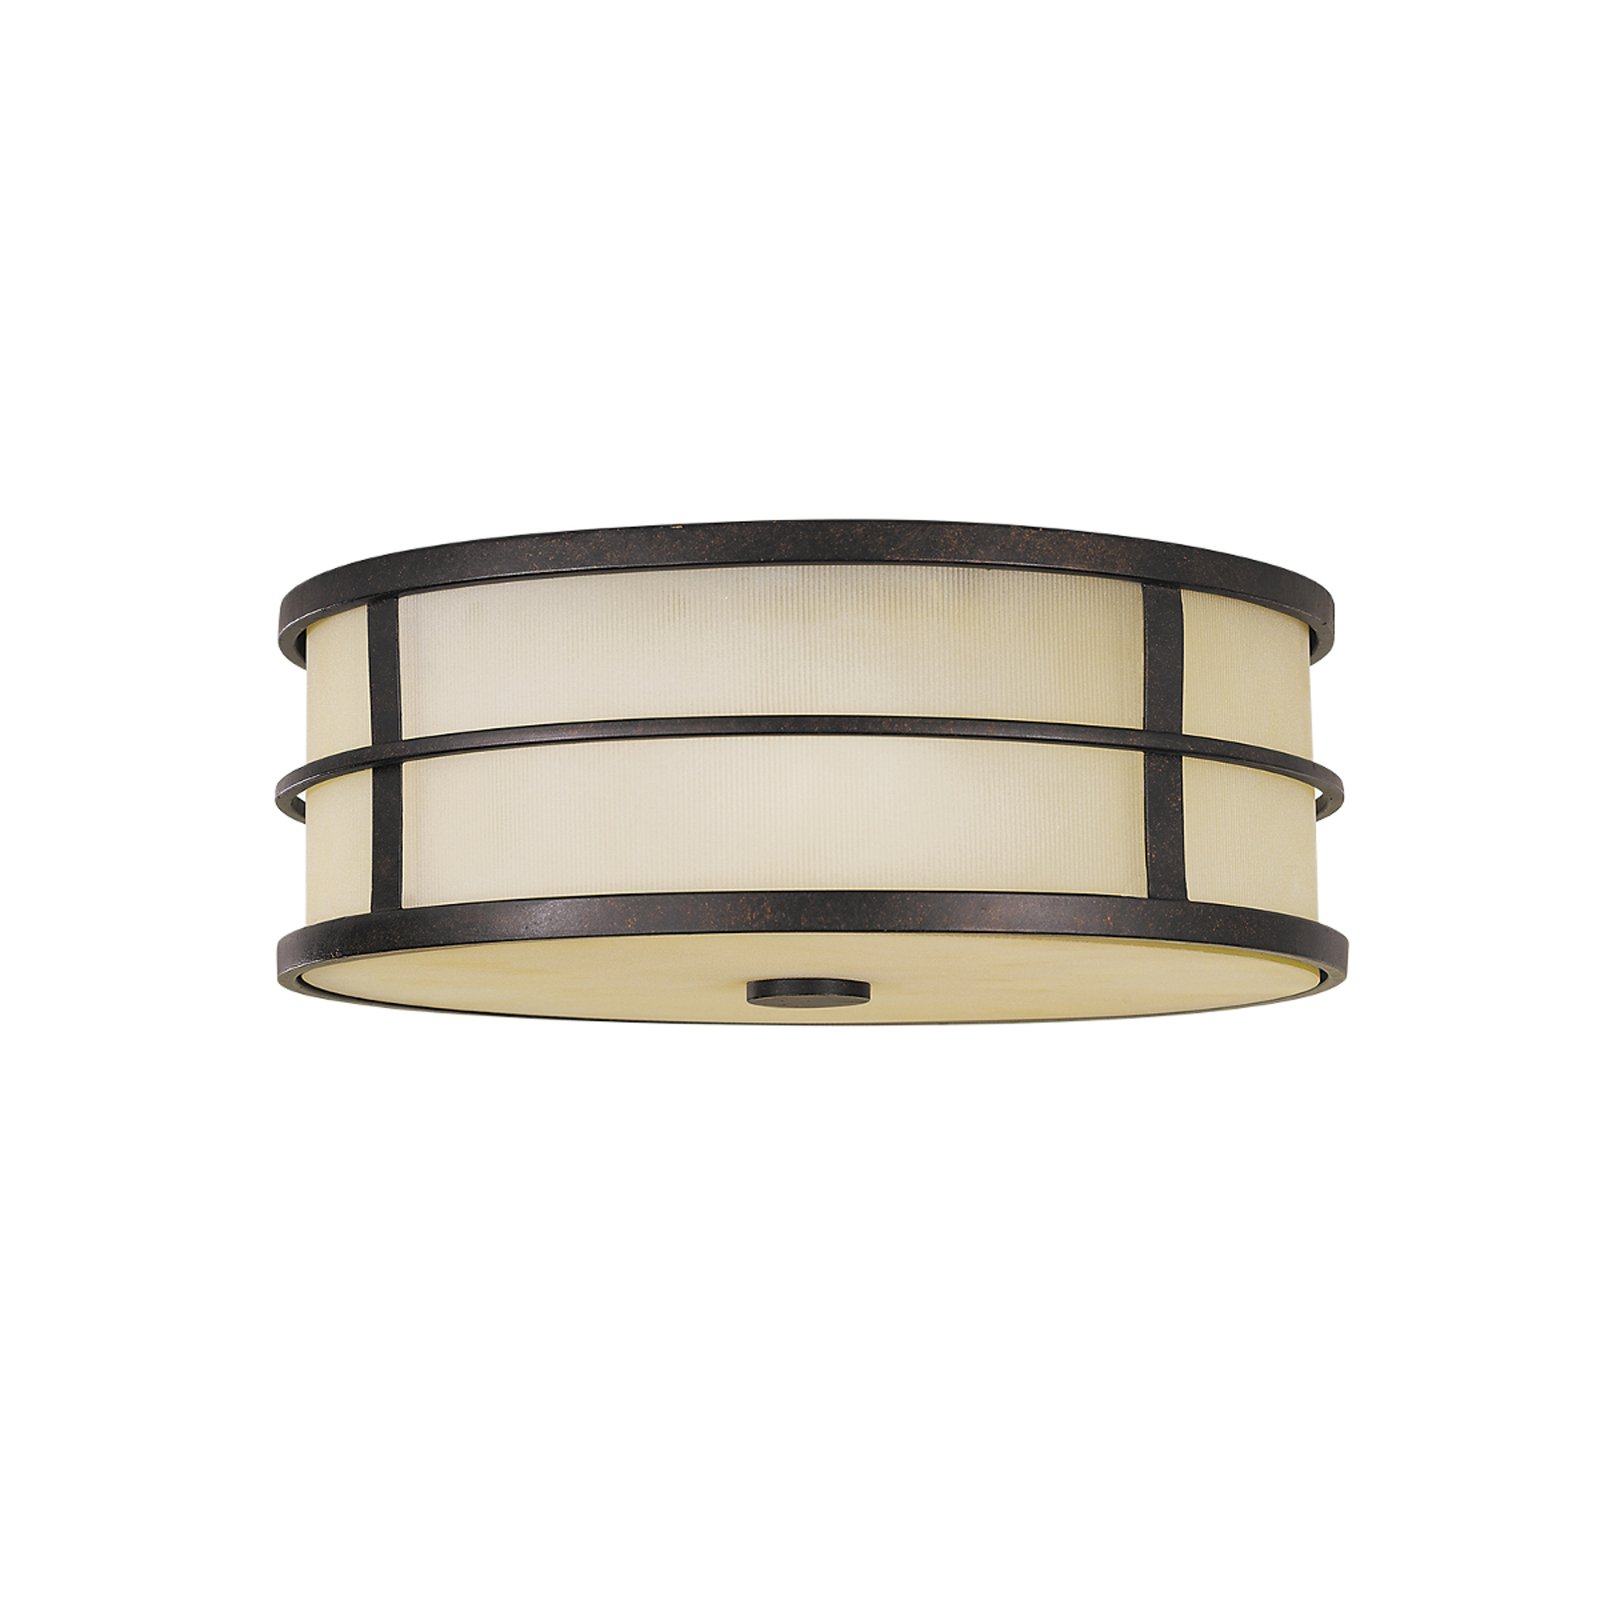 Fusion ceiling light height 12.4 cm